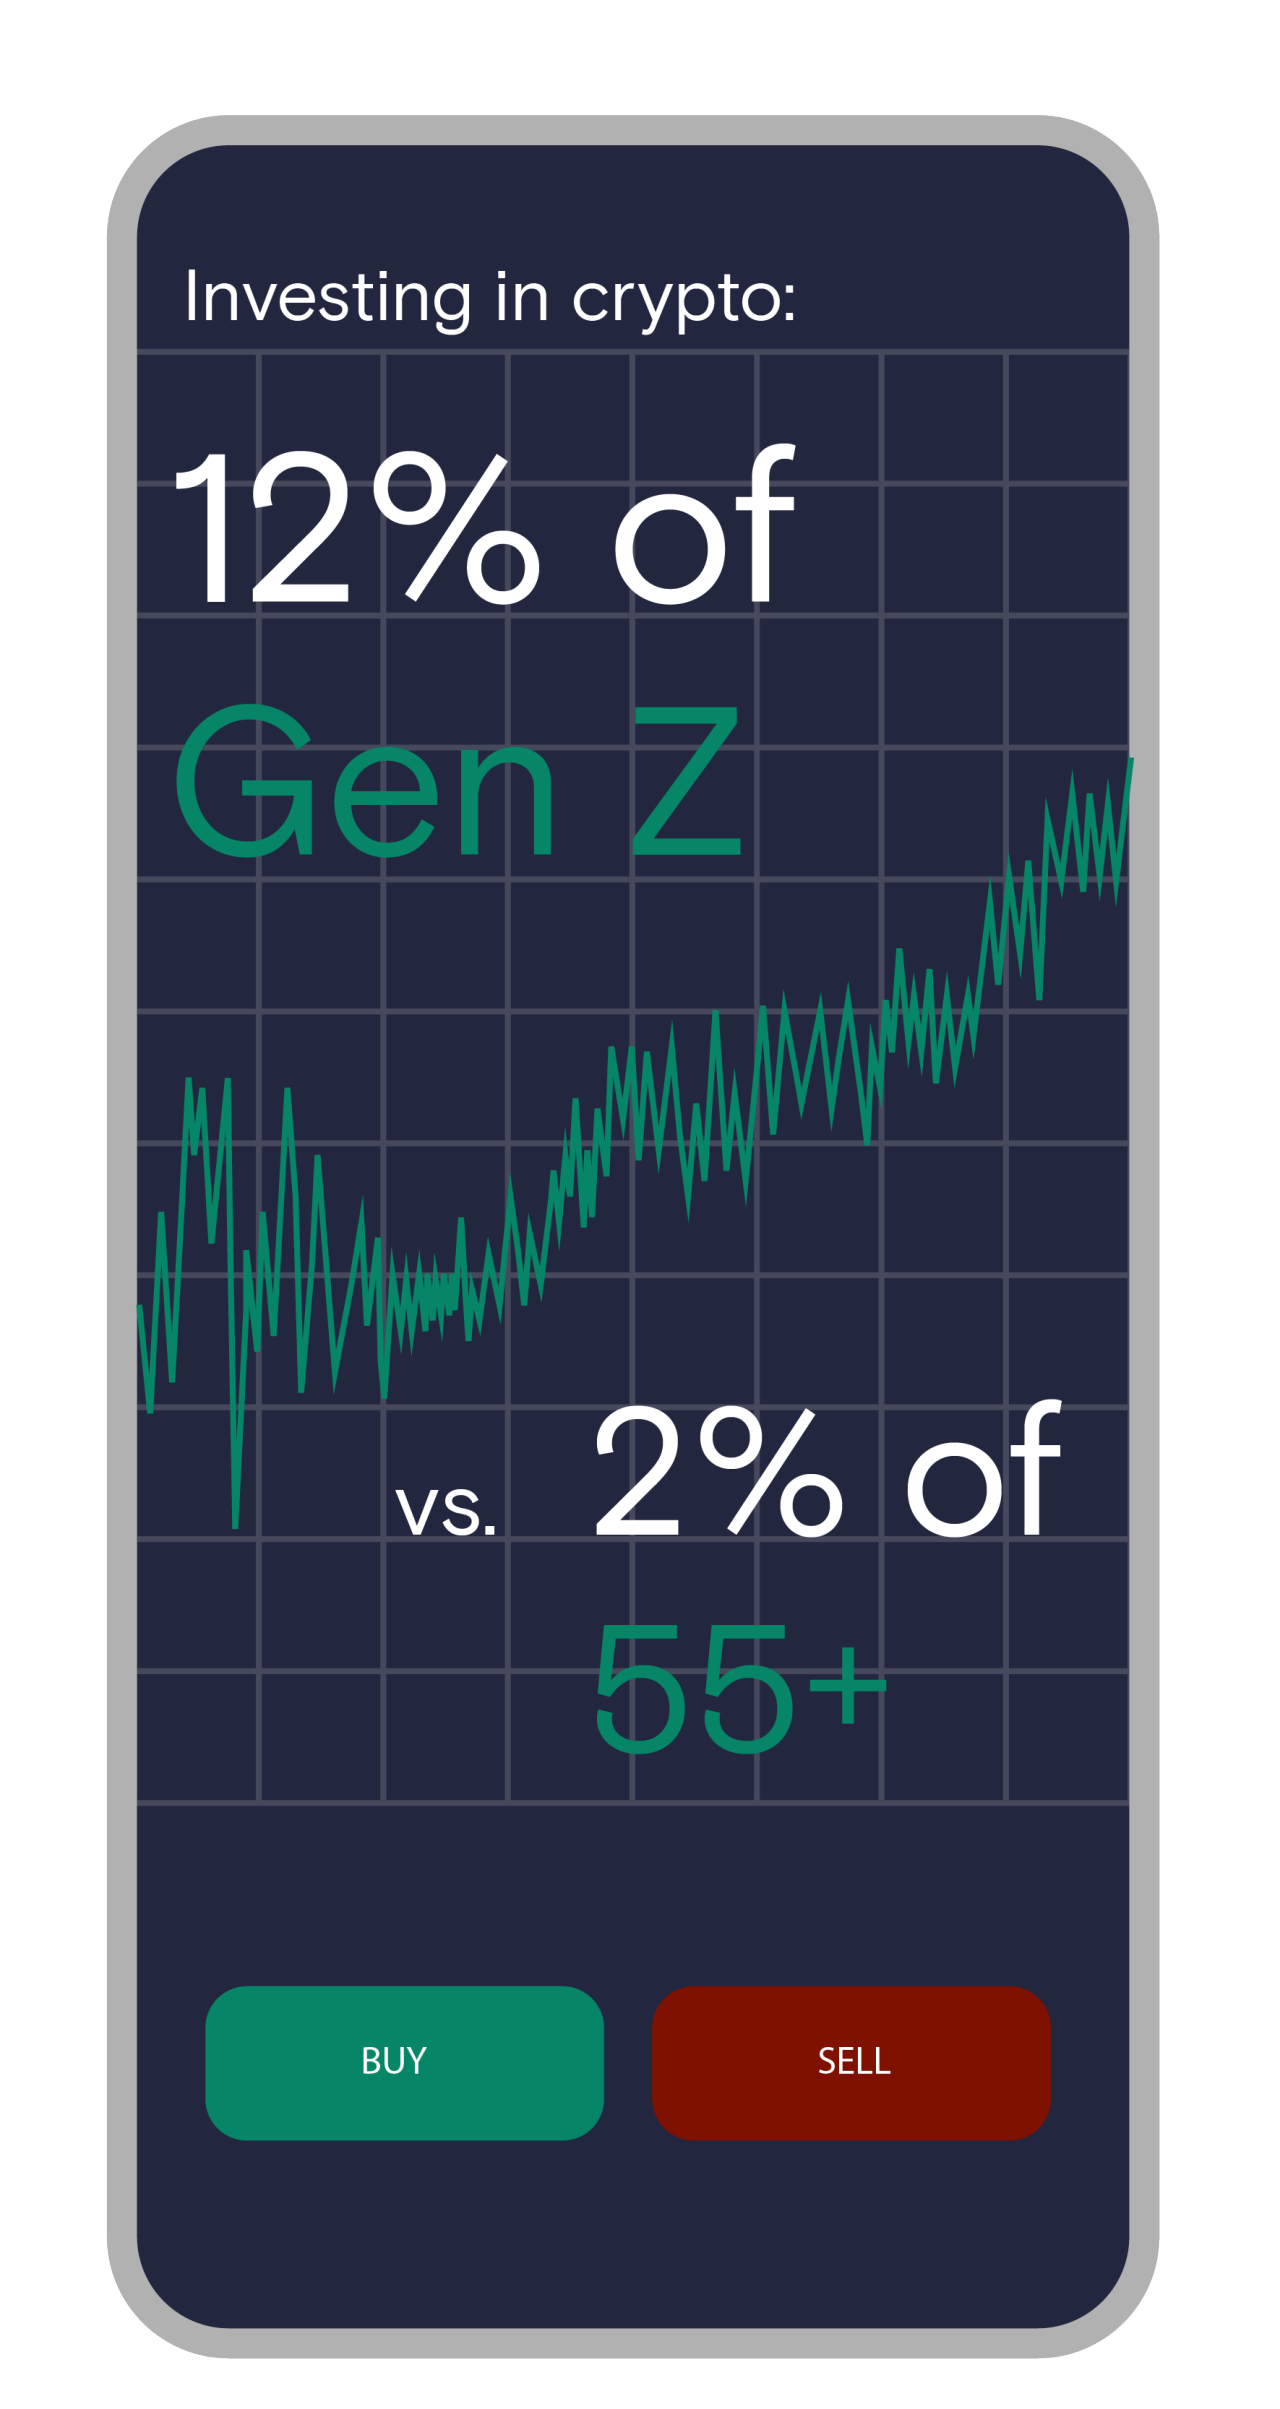 Image shows a mobile phone with the screen displaying a grid. At the top it reads 'investing in crypto:' and '12% of Gen Z' above a green line graph with multiple peaks and troughs. Under the line reads 'vs. 2% of 55+'. Under the grid there are two buttons, on the left is a 'buy' button in green and a 'sell' button on the right in red. The image represents the difference between generations and how they invest in crypto. 